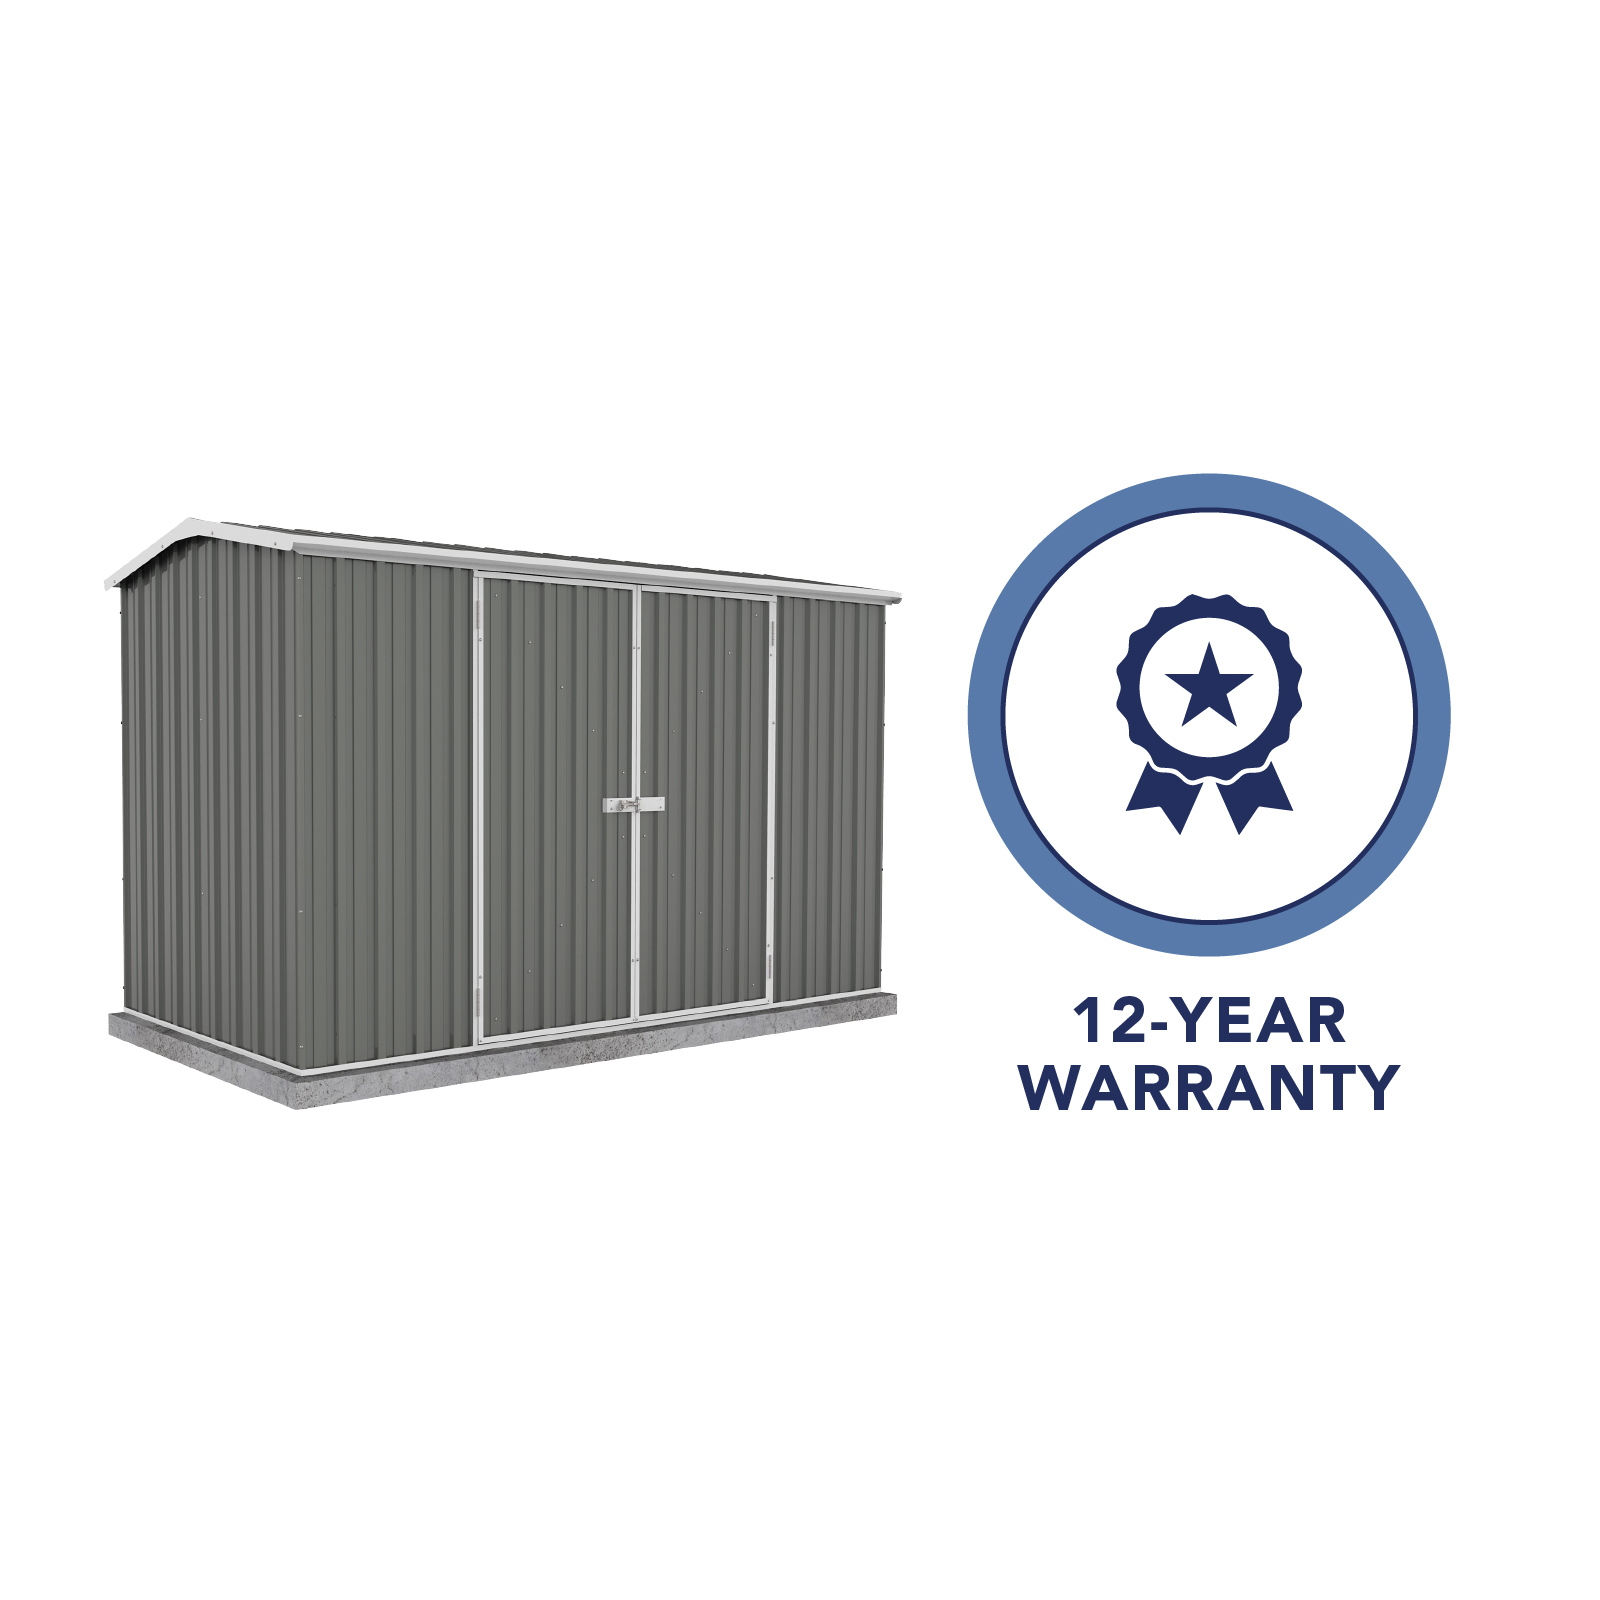 Absco Shed Premier 10 x 5 ft. Galvanized Steel and Metal Storage Shed, Gray - image 2 of 11